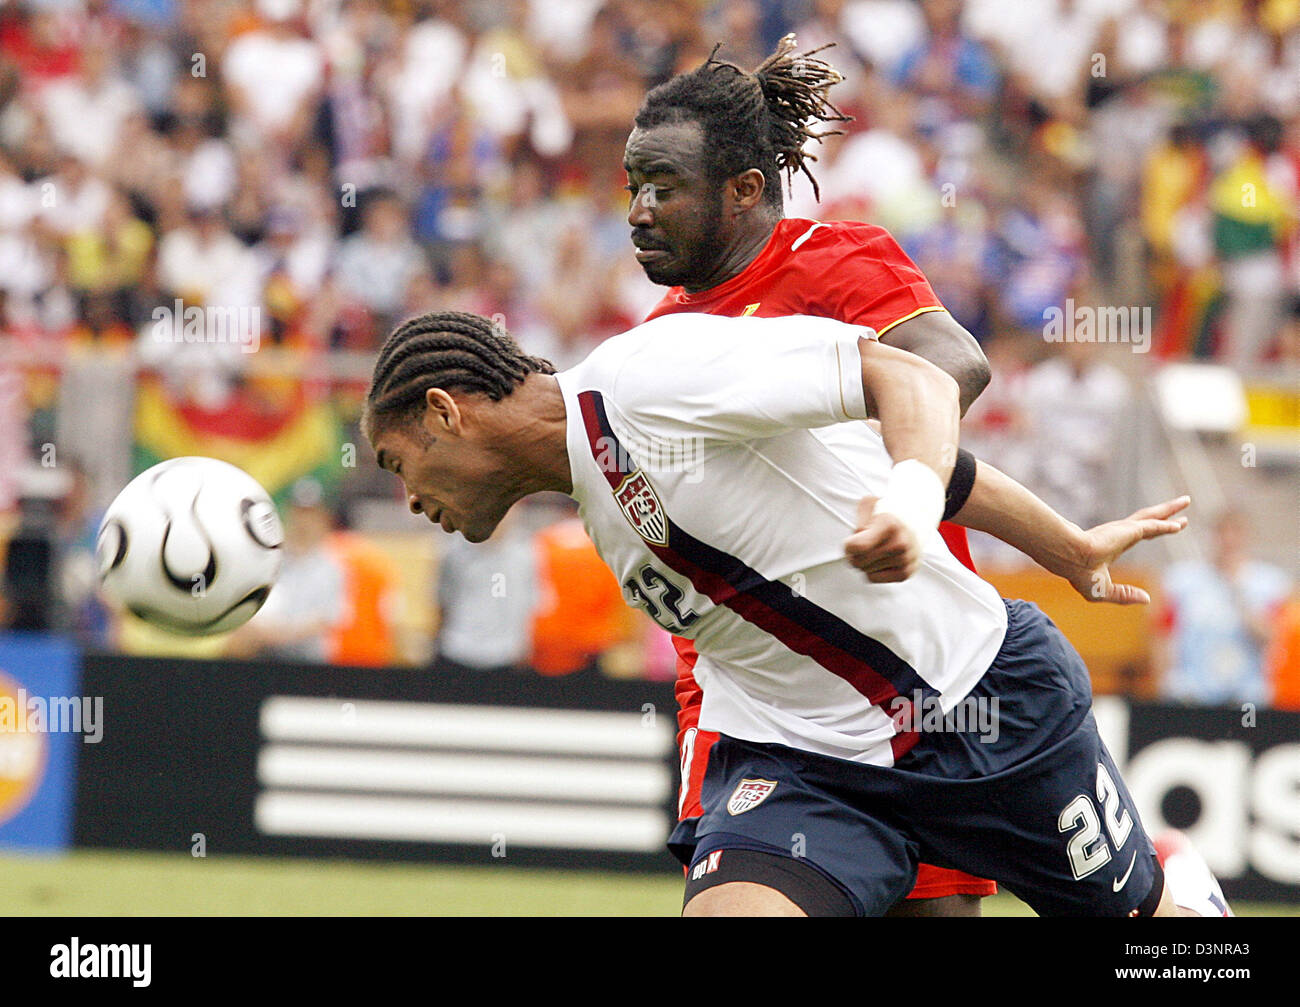 Razak Pimpong of Ghana (R) fights for the ball with Oguchi Onyewu of USA during the group E preliminary round match of the 2006 FIFA World Cup between Ghana and USA in Nuremberg, Germany, Thursday 22 June 2006. DPA/DANIEL KARMANN +++ Mobile Services OUT +++ Please also refer to FIFA's Terms and Conditions. Stock Photo